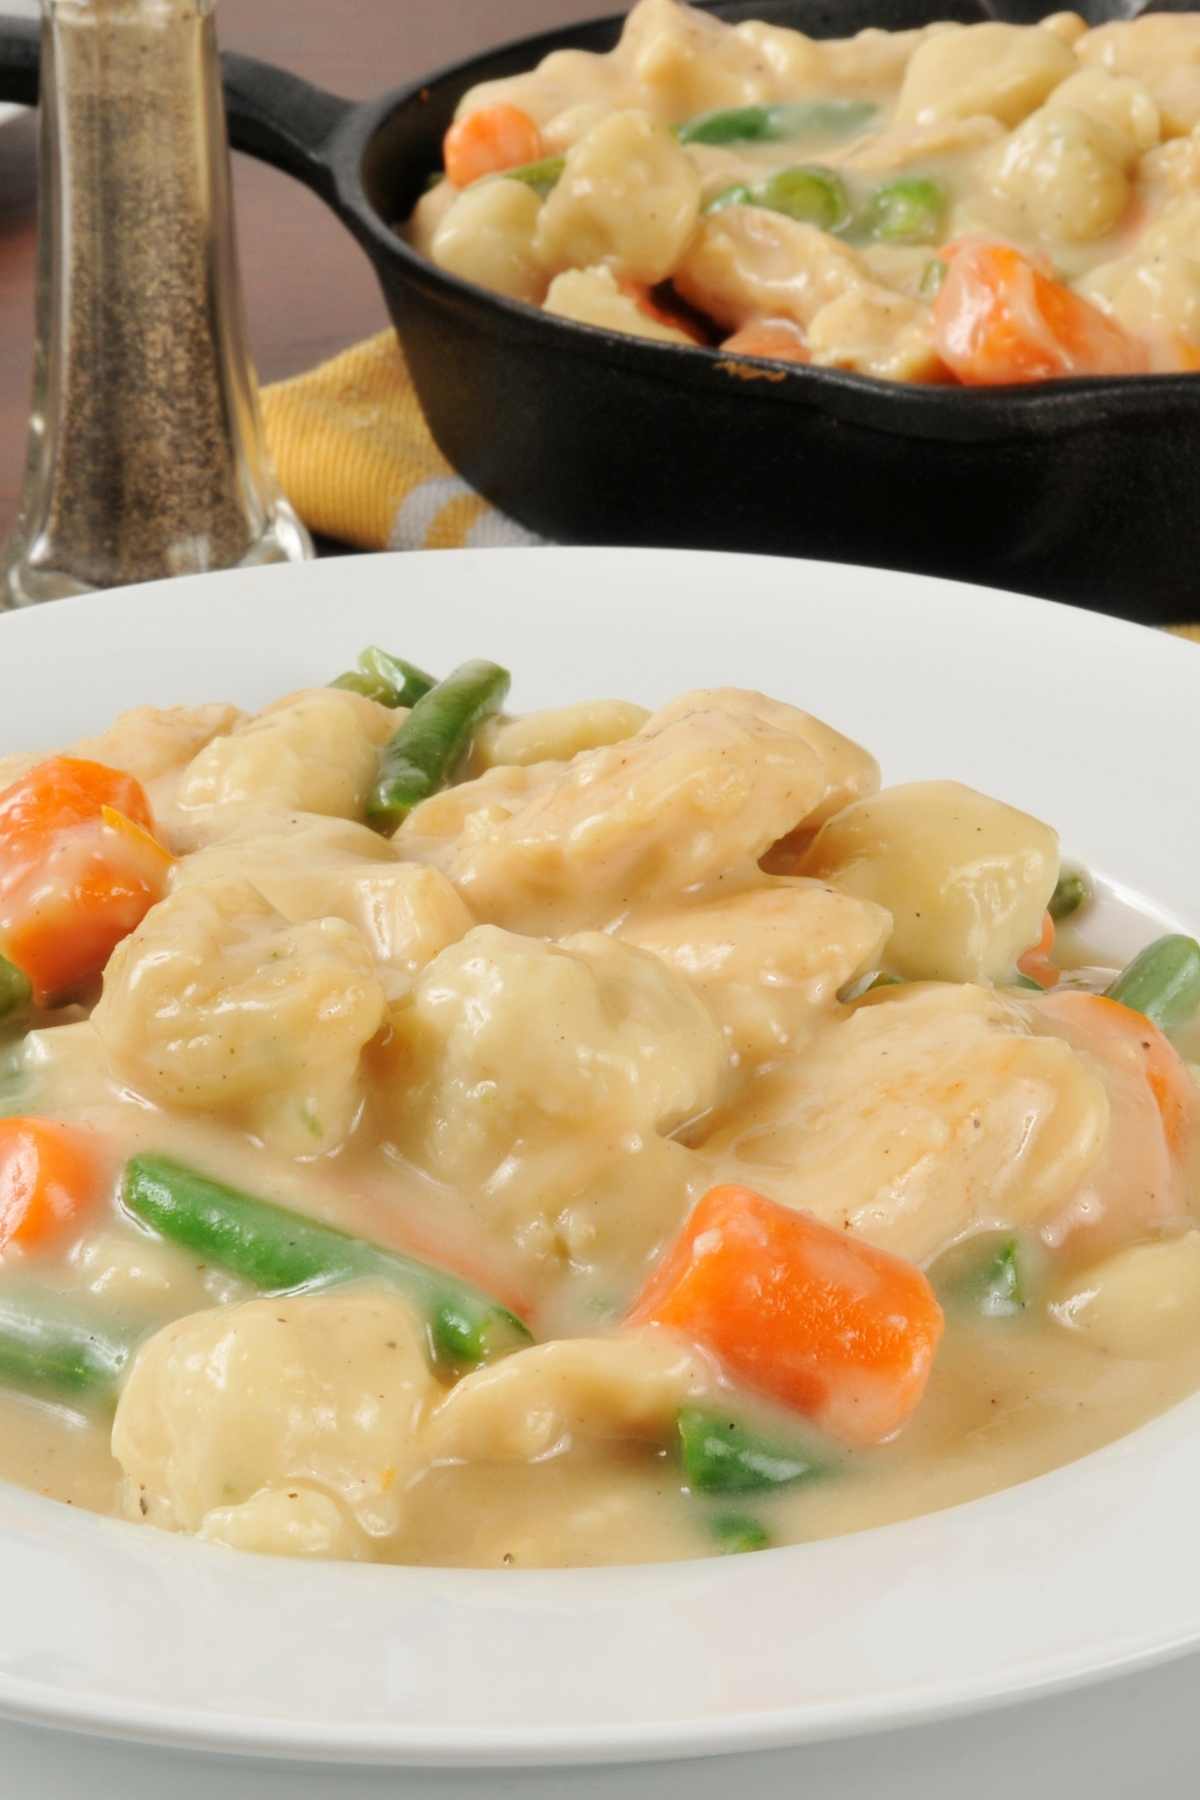 Creamy, rich, and hearty is the best way to describe this recipe for chicken and dumplings with biscuits. It’s a stick-to-your-ribs comfort dish that’ll satisfy even the biggest of appetites!